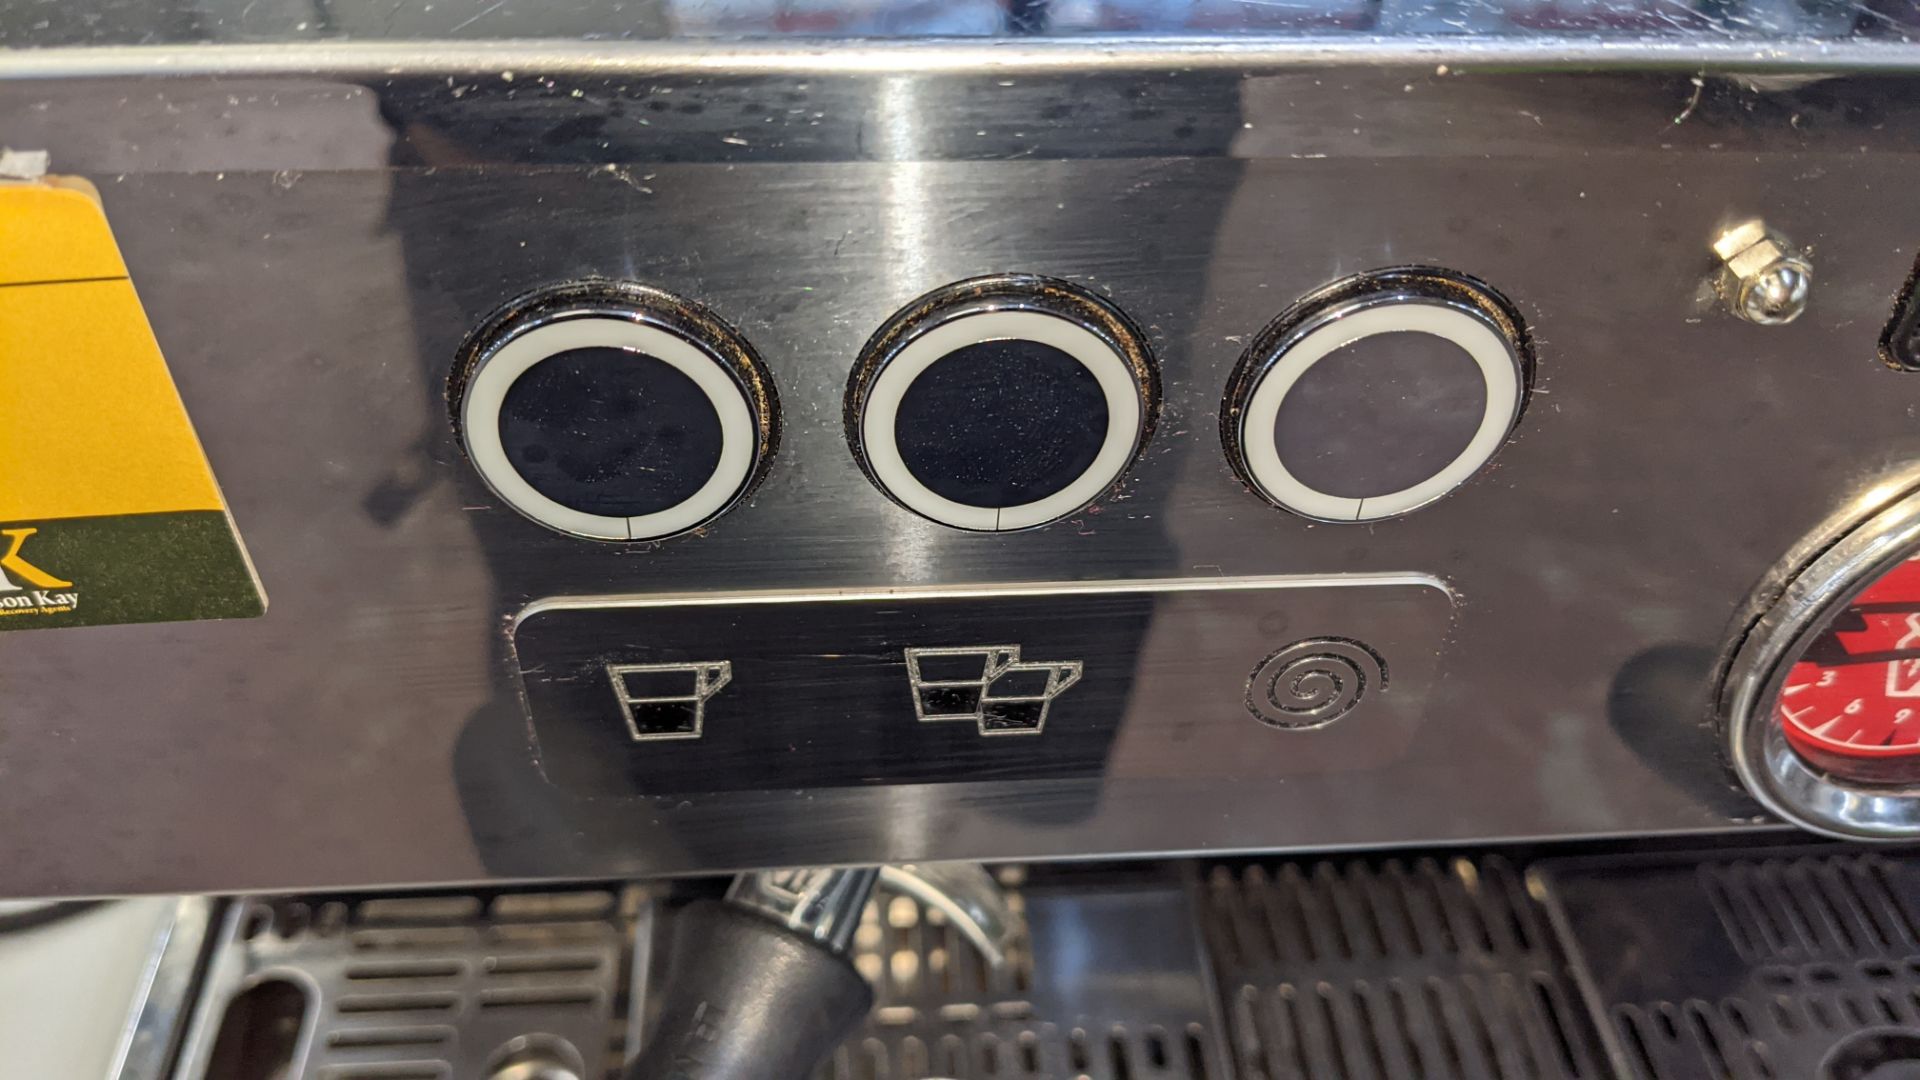 La Marzocco Linea PB 2 Group commercial coffee machine. A sticker on the machine suggests it was man - Image 12 of 28